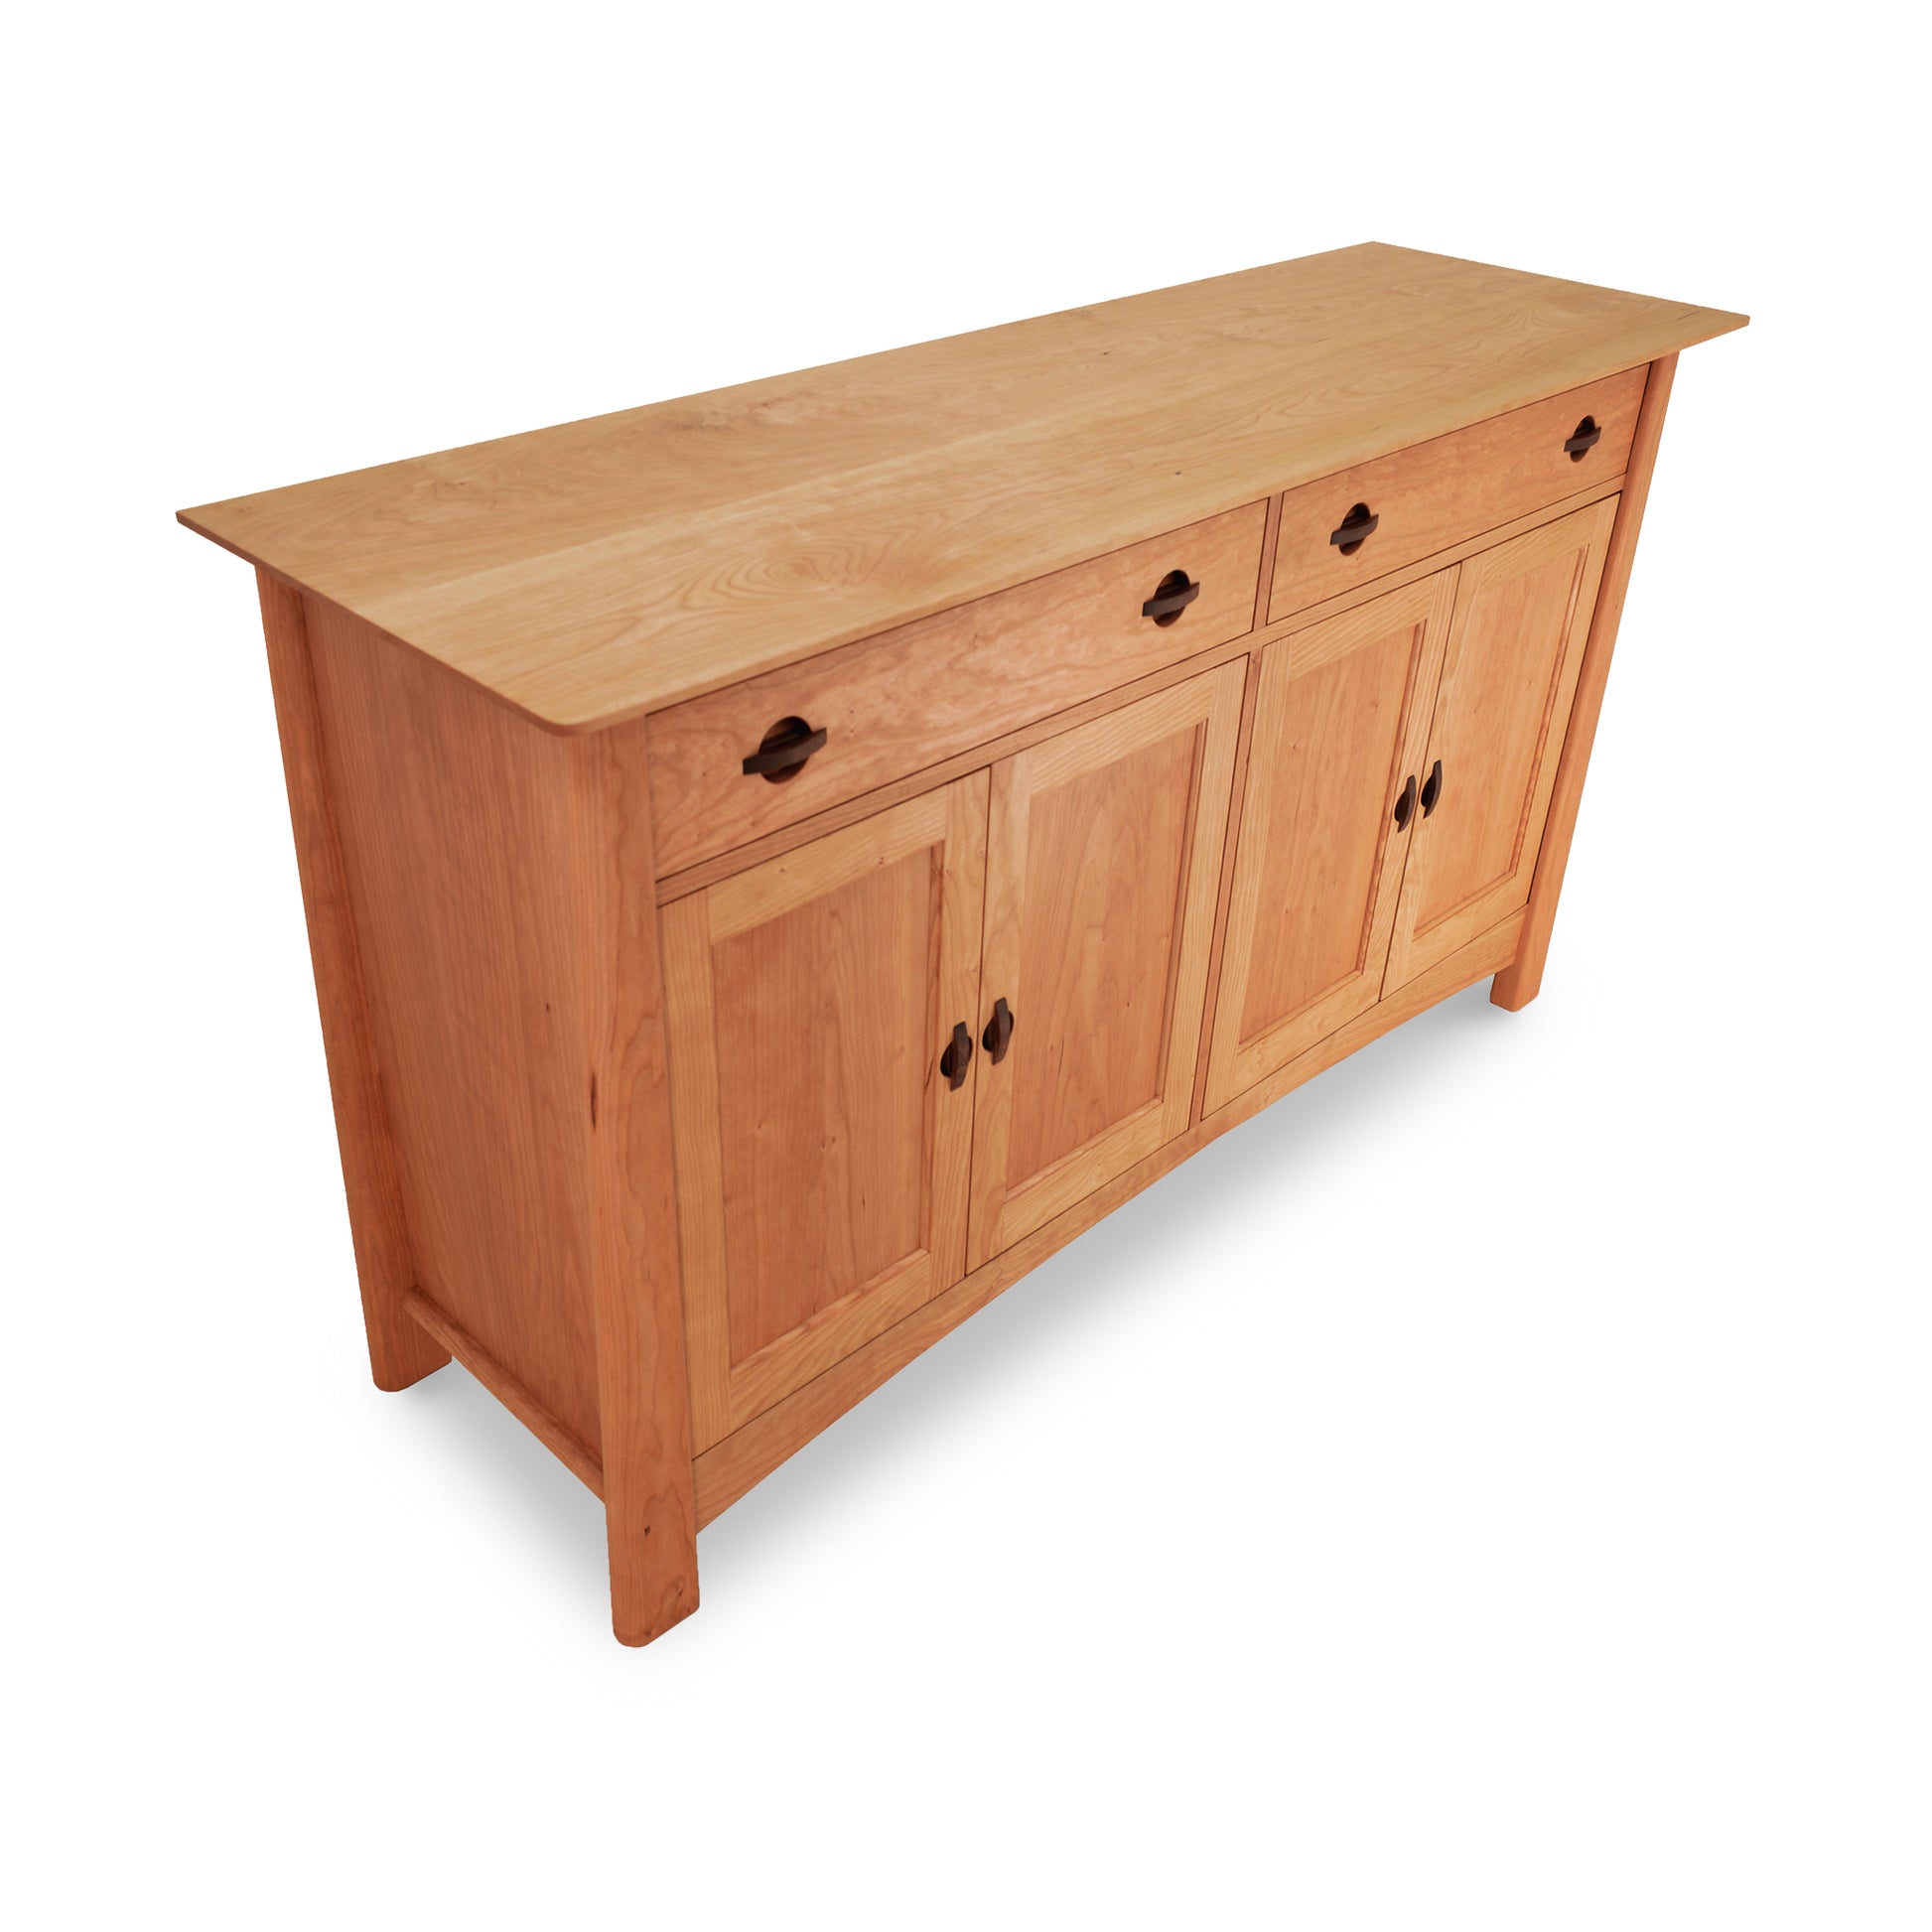 A large Maple Corner Woodworks Cherry Moon sideboard-buffet with three drawers and three cabinet doors, featuring black metal handles and standing on a flat base, isolated on a white background.